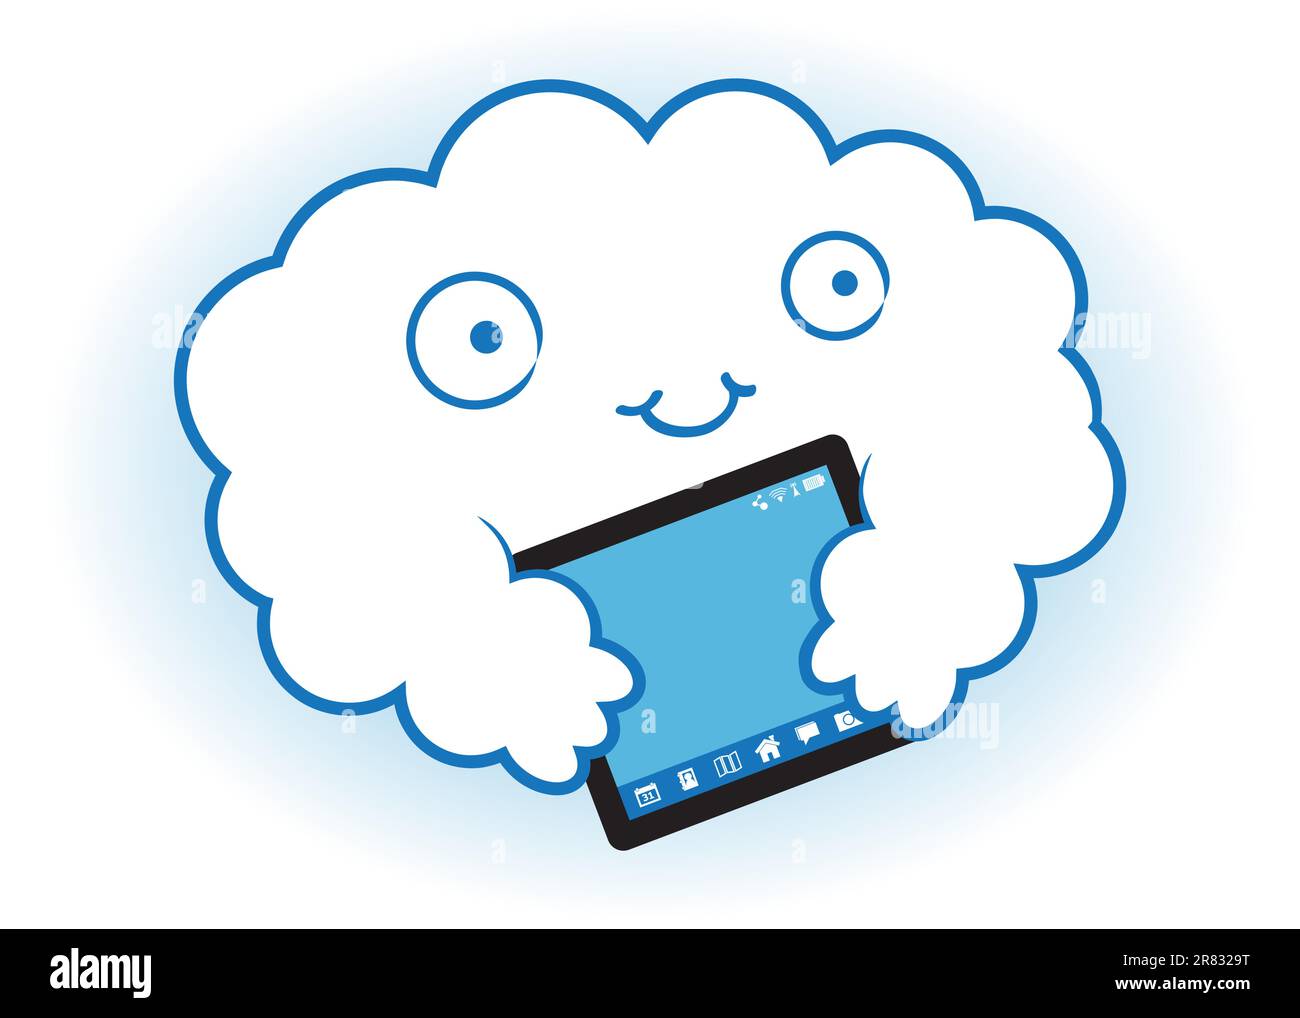 cloud hugging the tablet as a sign of friendship Stock Vector